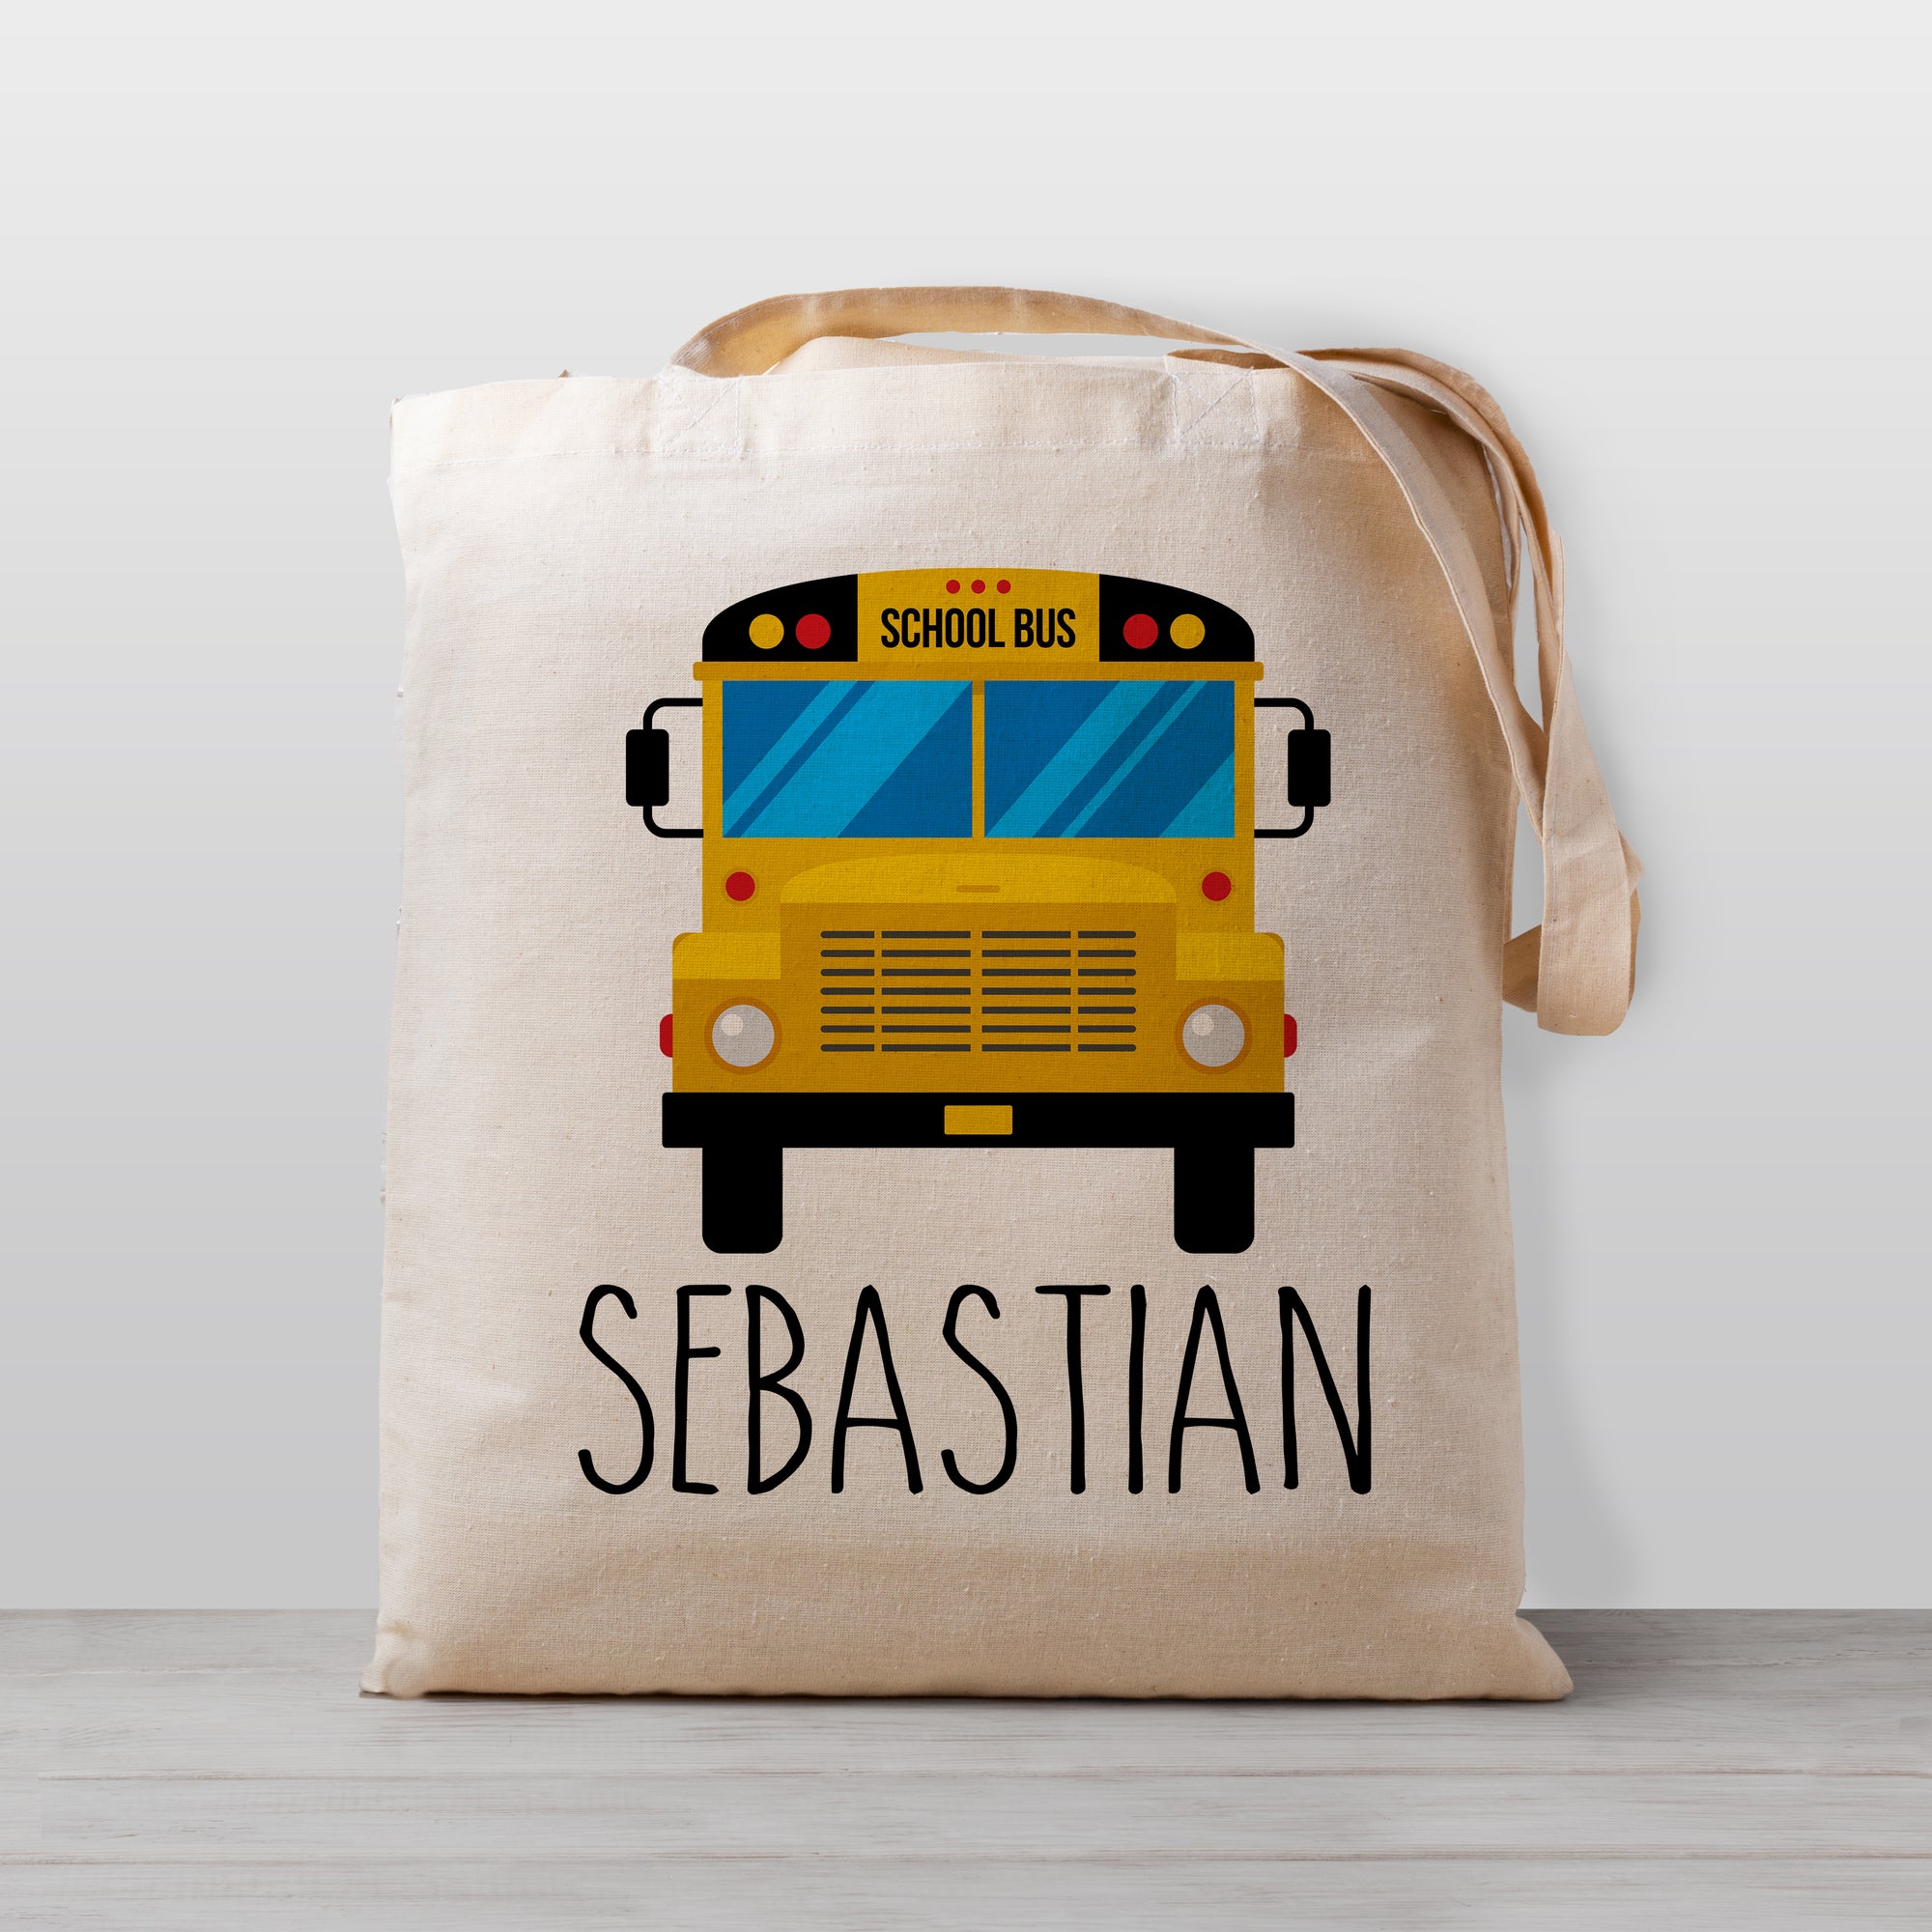 A school bus personalized tote bag, perfect for carrying your little one's stuff to preschool or kindergarten. Works great as a library book bag, too! , 100% natural cotton canvas